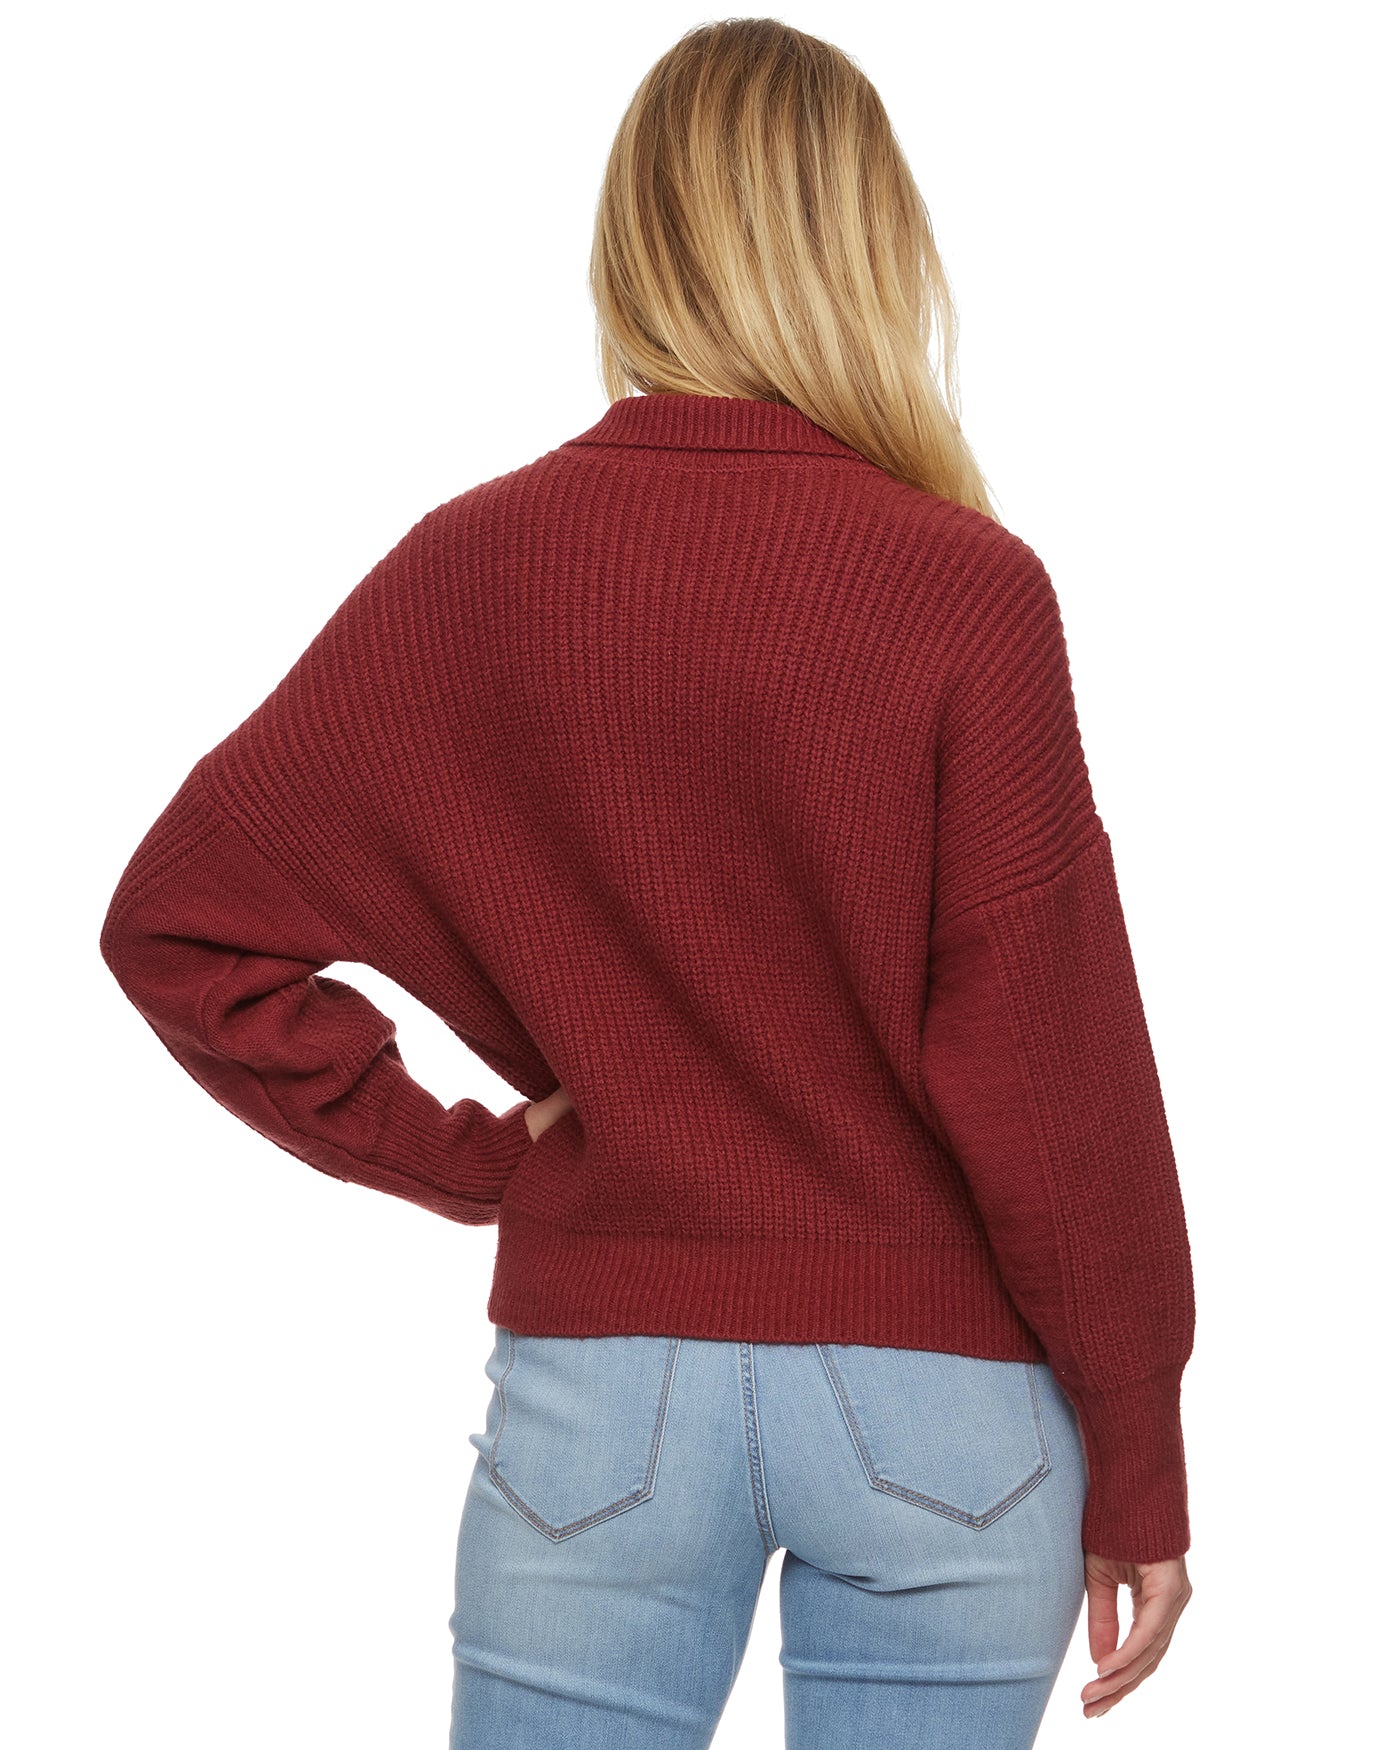 CAMERON CABLE KNIT ¼-ZIP SWEATER